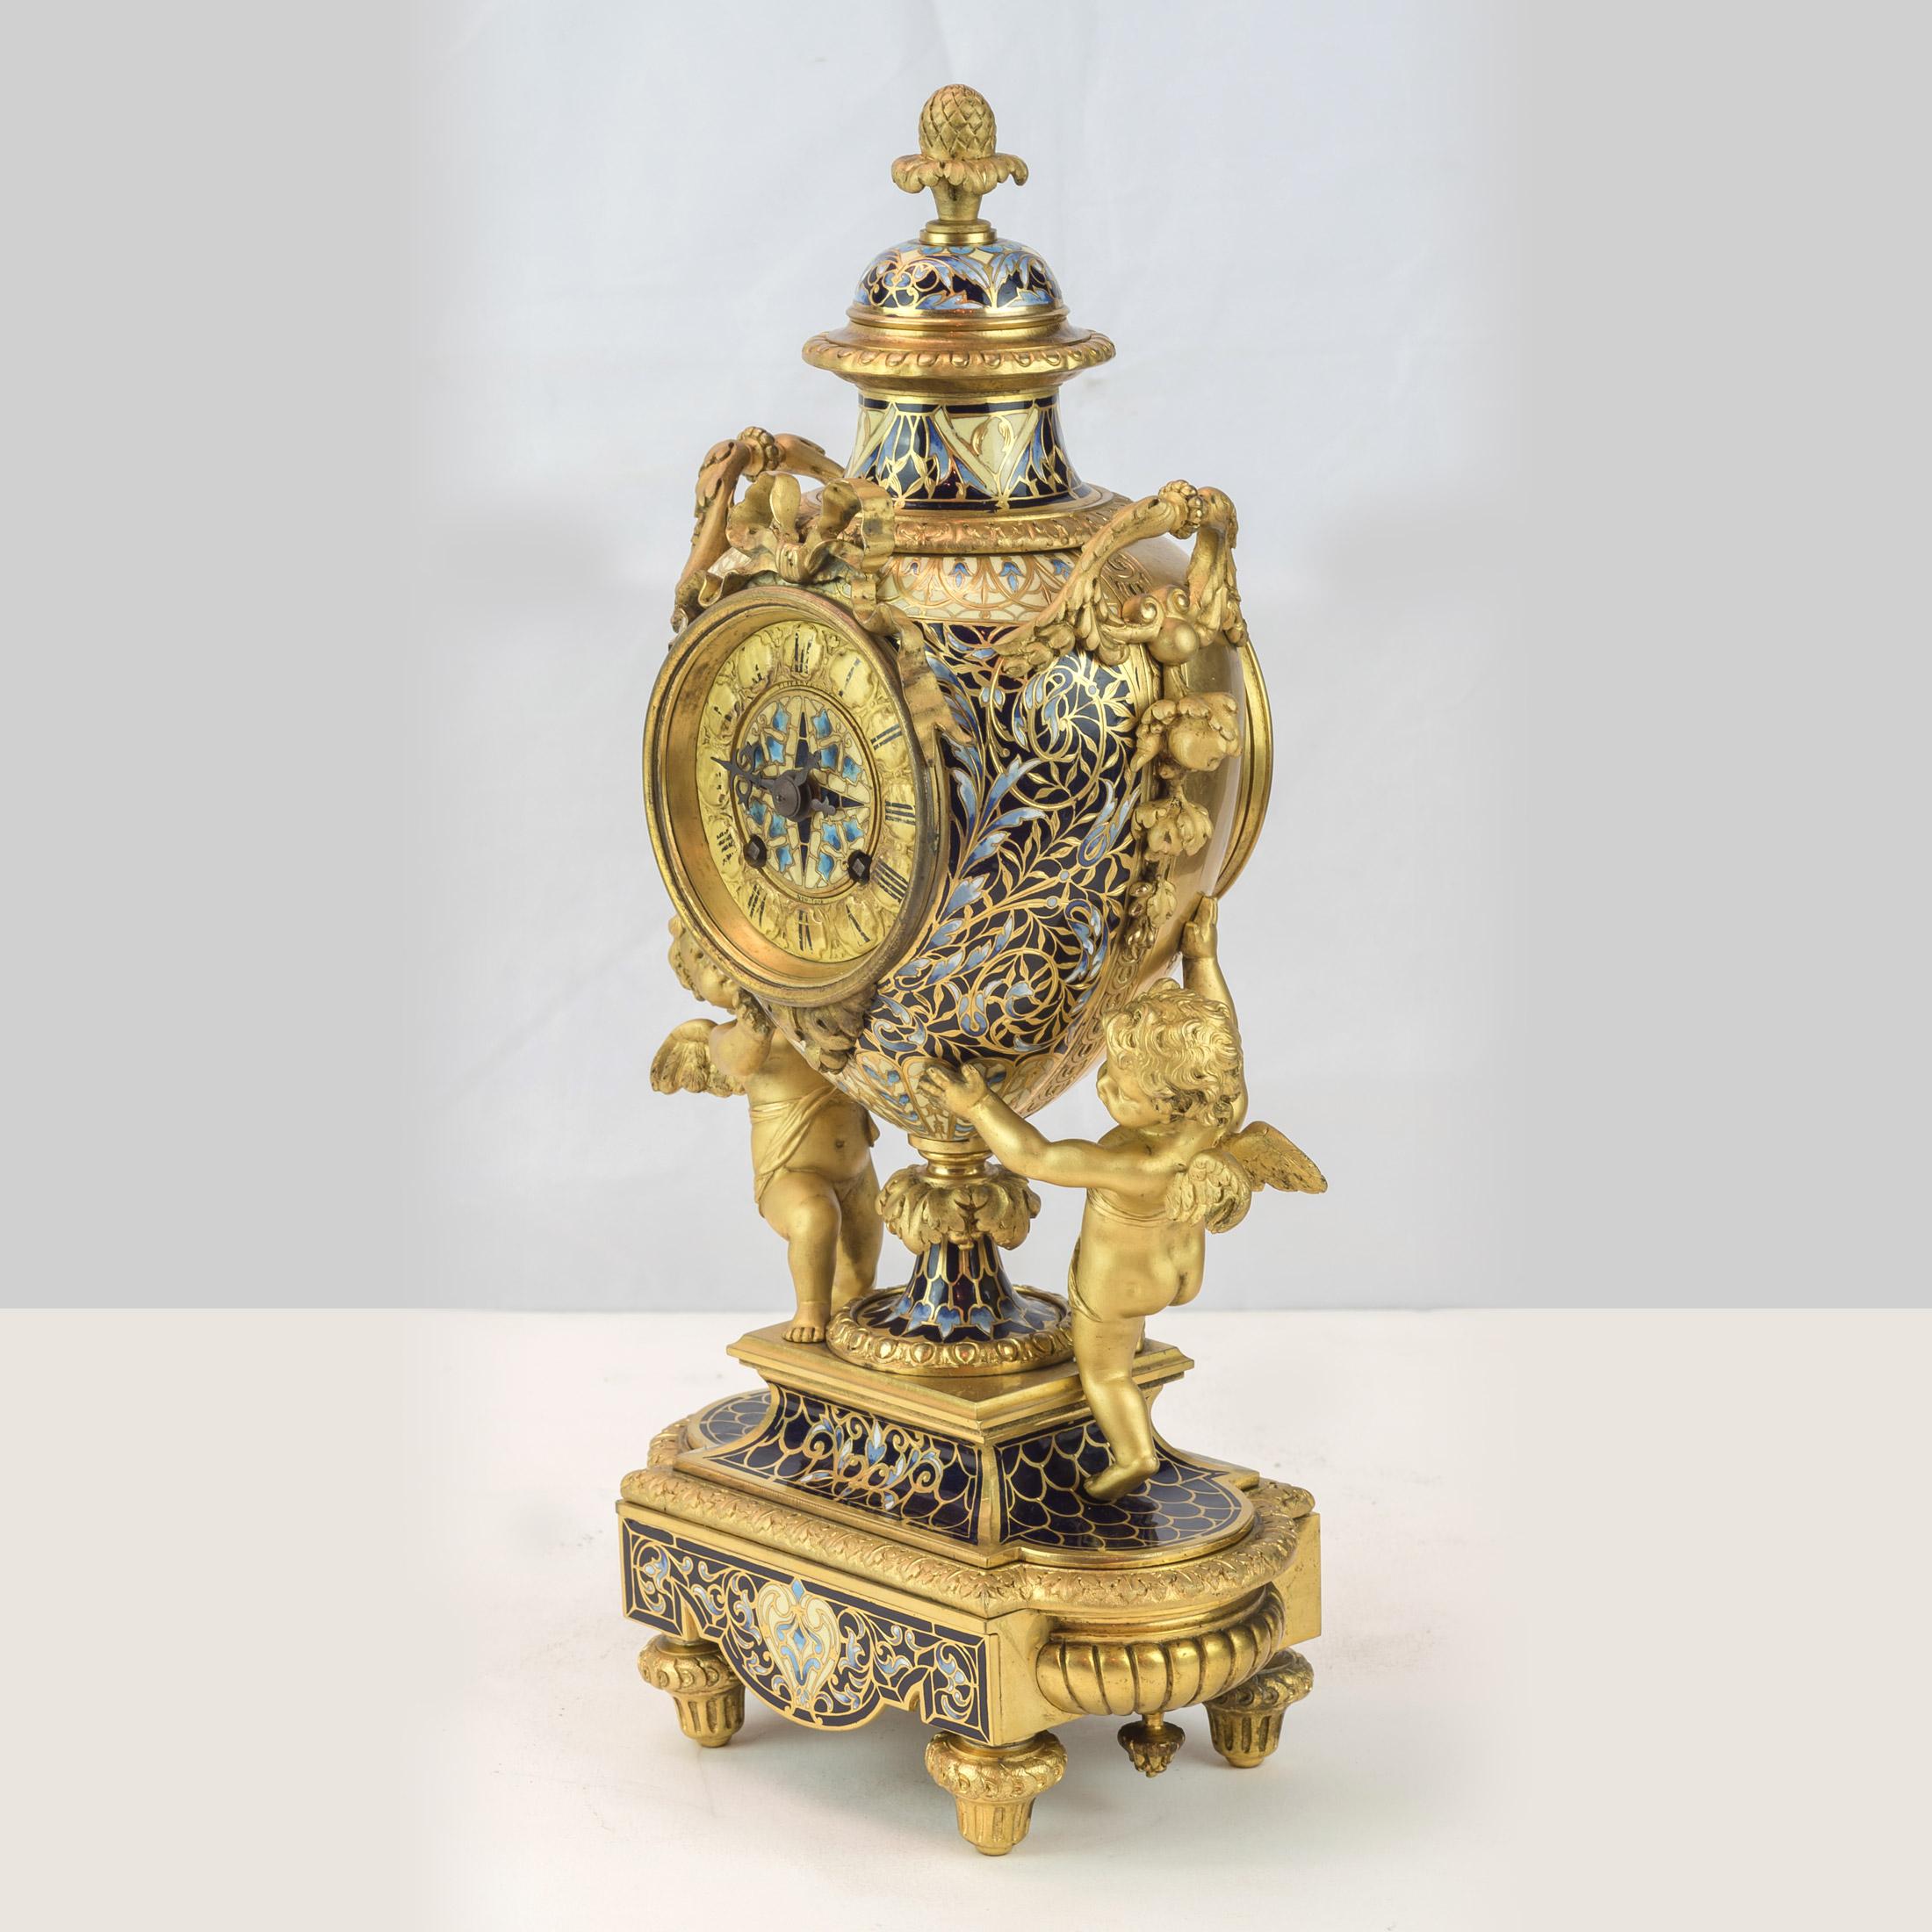 Louis XV style champleve enamel and gilt bronze clock
The urn form case housing a clock movement, surmounted by a flambeau trophy, the enamel dial with black enameled Roman numerals, adorned by twin winged cherubs, the movement marked 